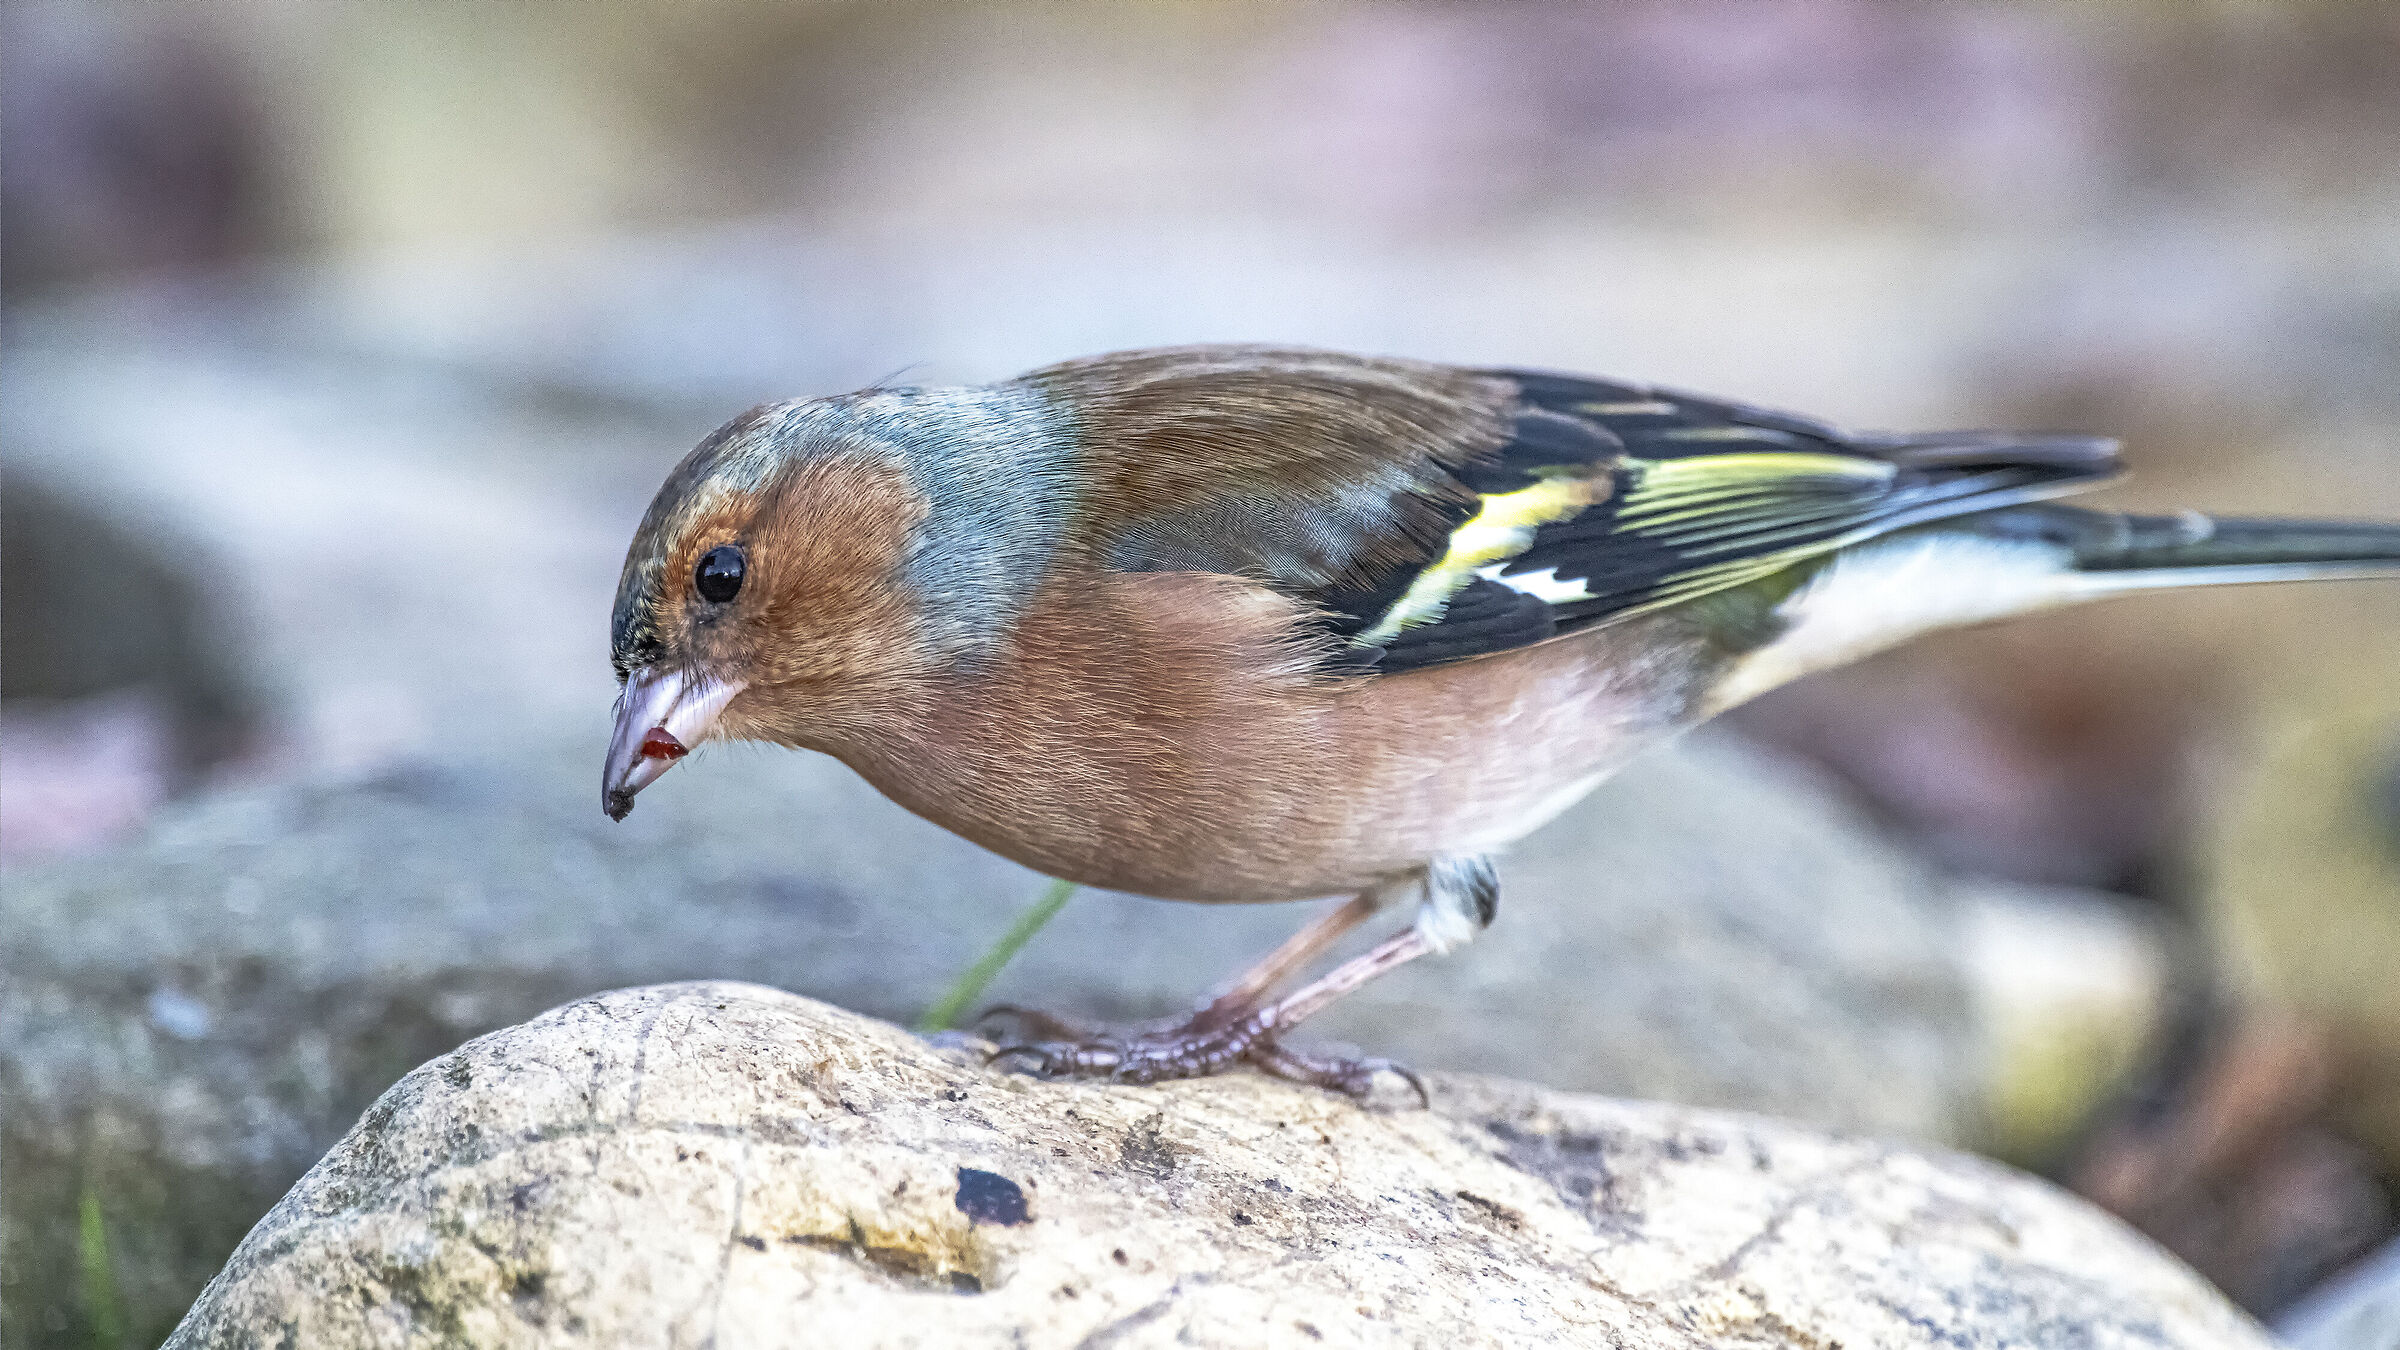 The Chaffinch's meal...